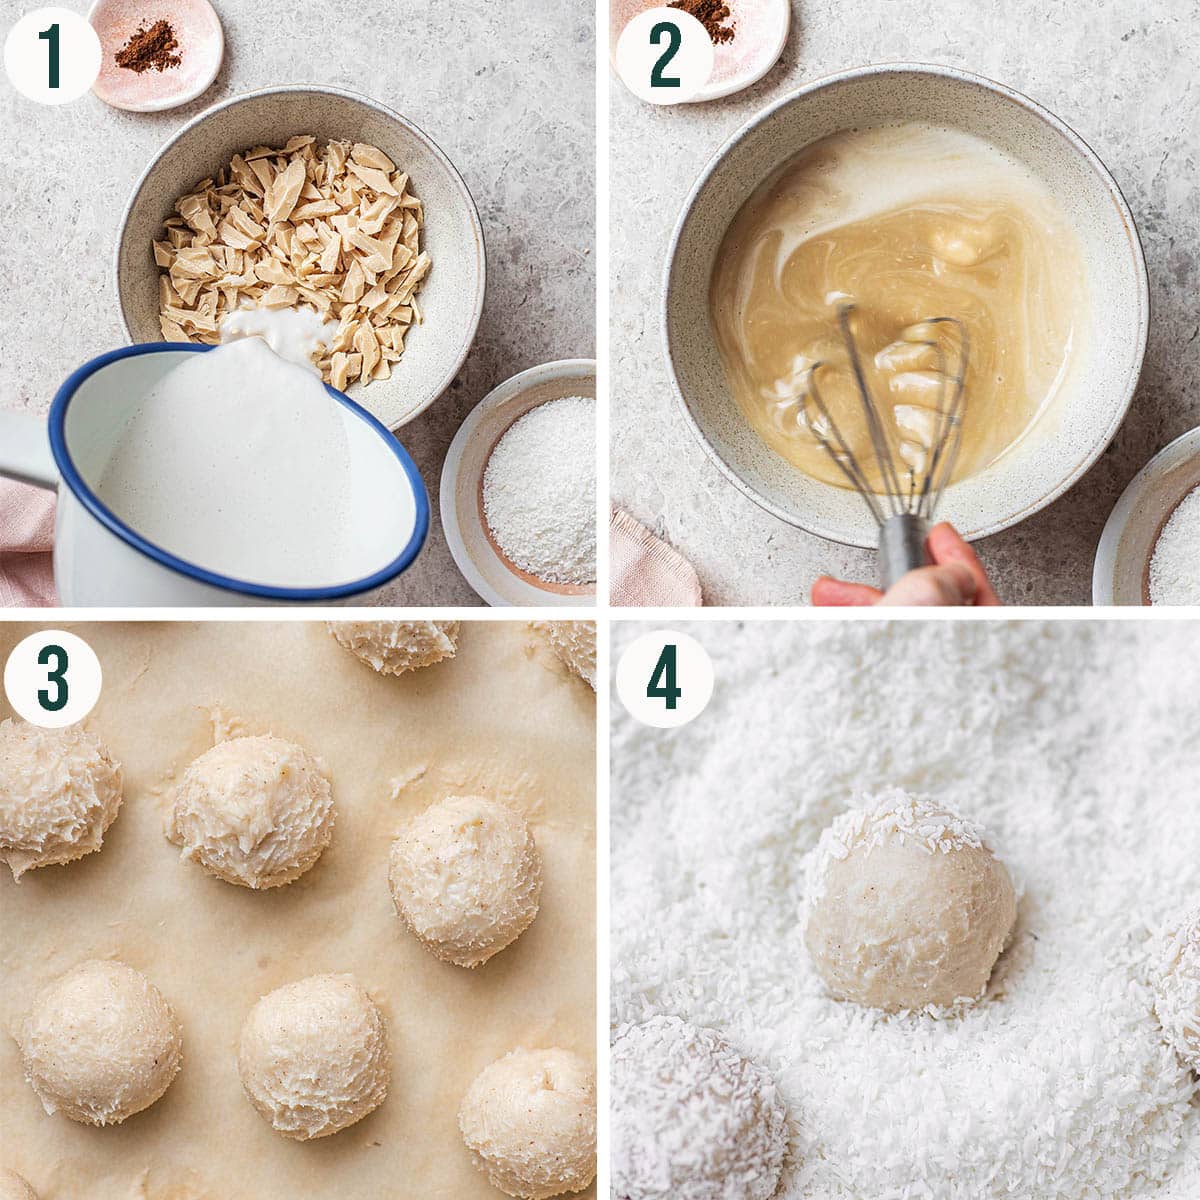 White chocolate truffles steps 1 to 4, making the ganache, rolling into balls, and coating in coconut.